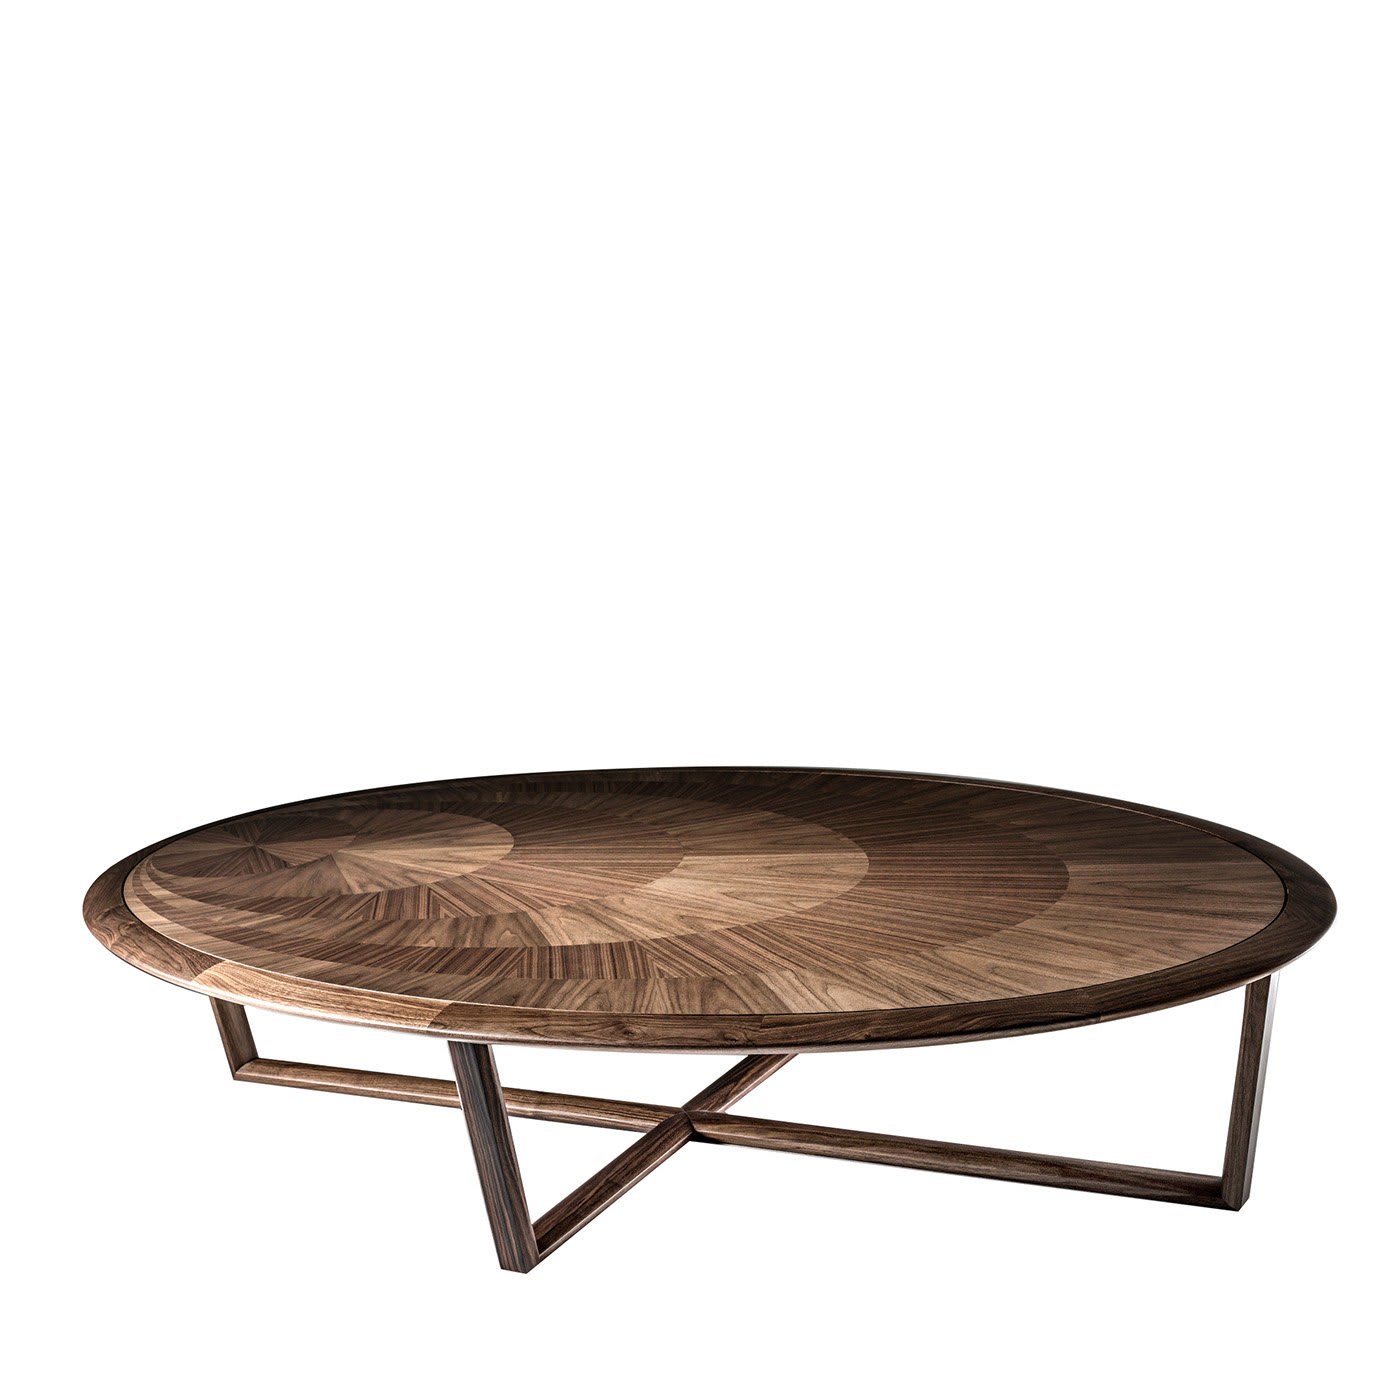 Piramide Coffee Table by Ivano Colombo - Annibale Colombo